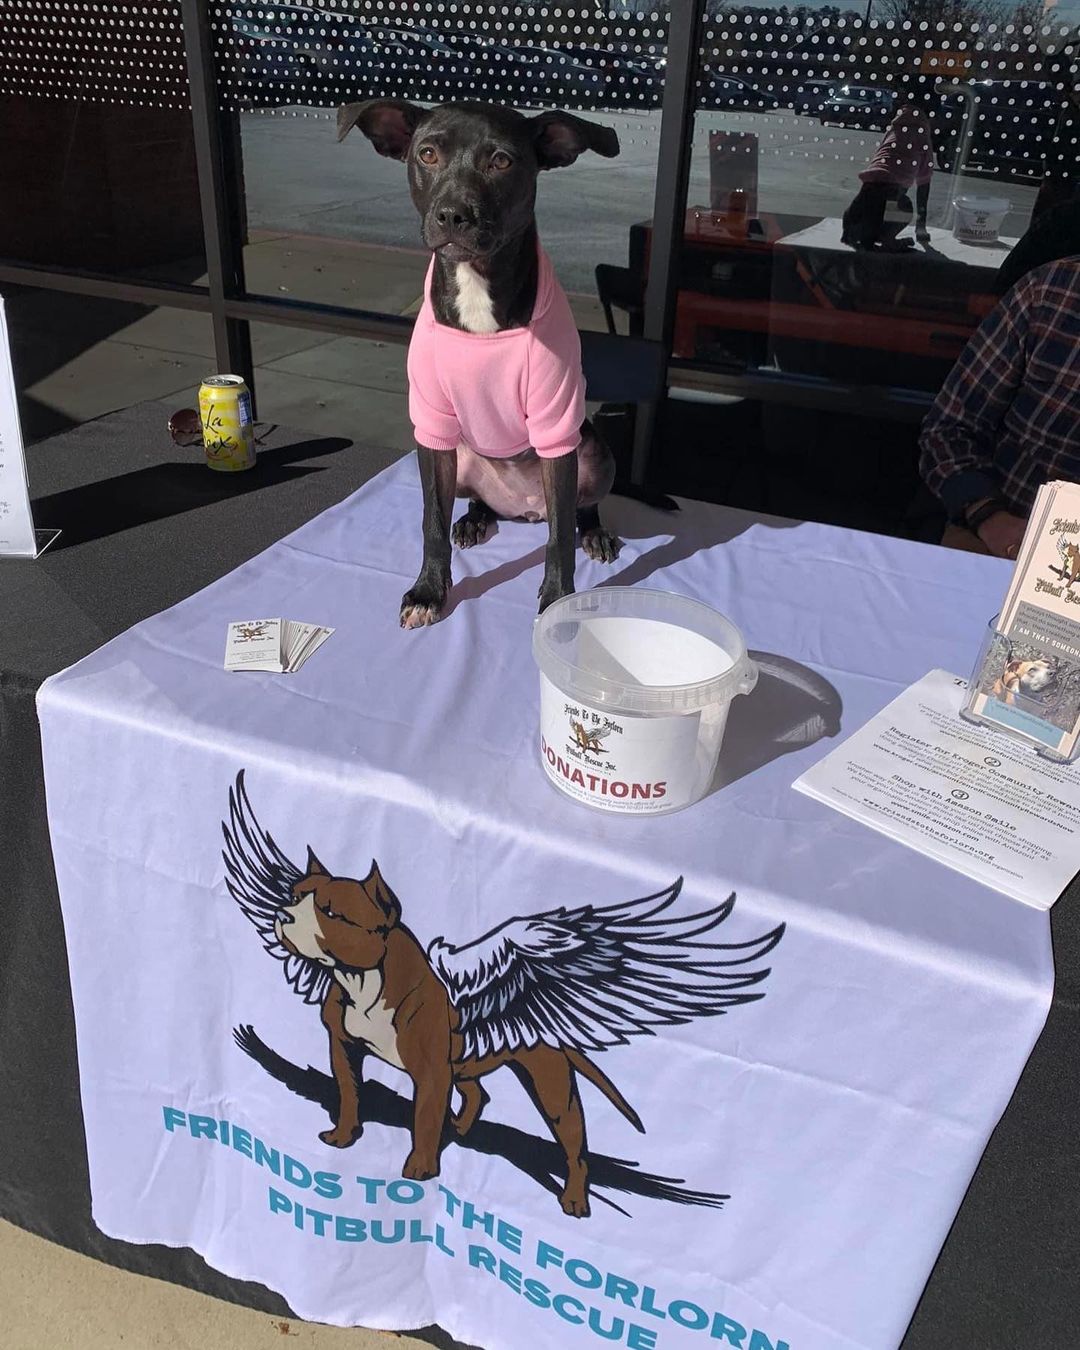 There’s still time to come by to see Sophie during the Orangetheory Fitness West Cobb fundraiser for FTTF! Sophie will be here until 2:00 and is hoping to meet her forever family today - is it you?!? <a target='_blank' href='https://www.instagram.com/explore/tags/fttf/'>#fttf</a> <a target='_blank' href='https://www.instagram.com/explore/tags/adoptable/'>#adoptable</a> <a target='_blank' href='https://www.instagram.com/explore/tags/sophie/'>#sophie</a> <a target='_blank' href='https://www.instagram.com/explore/tags/rescue/'>#rescue</a> <a target='_blank' href='https://www.instagram.com/explore/tags/dog/'>#dog</a>